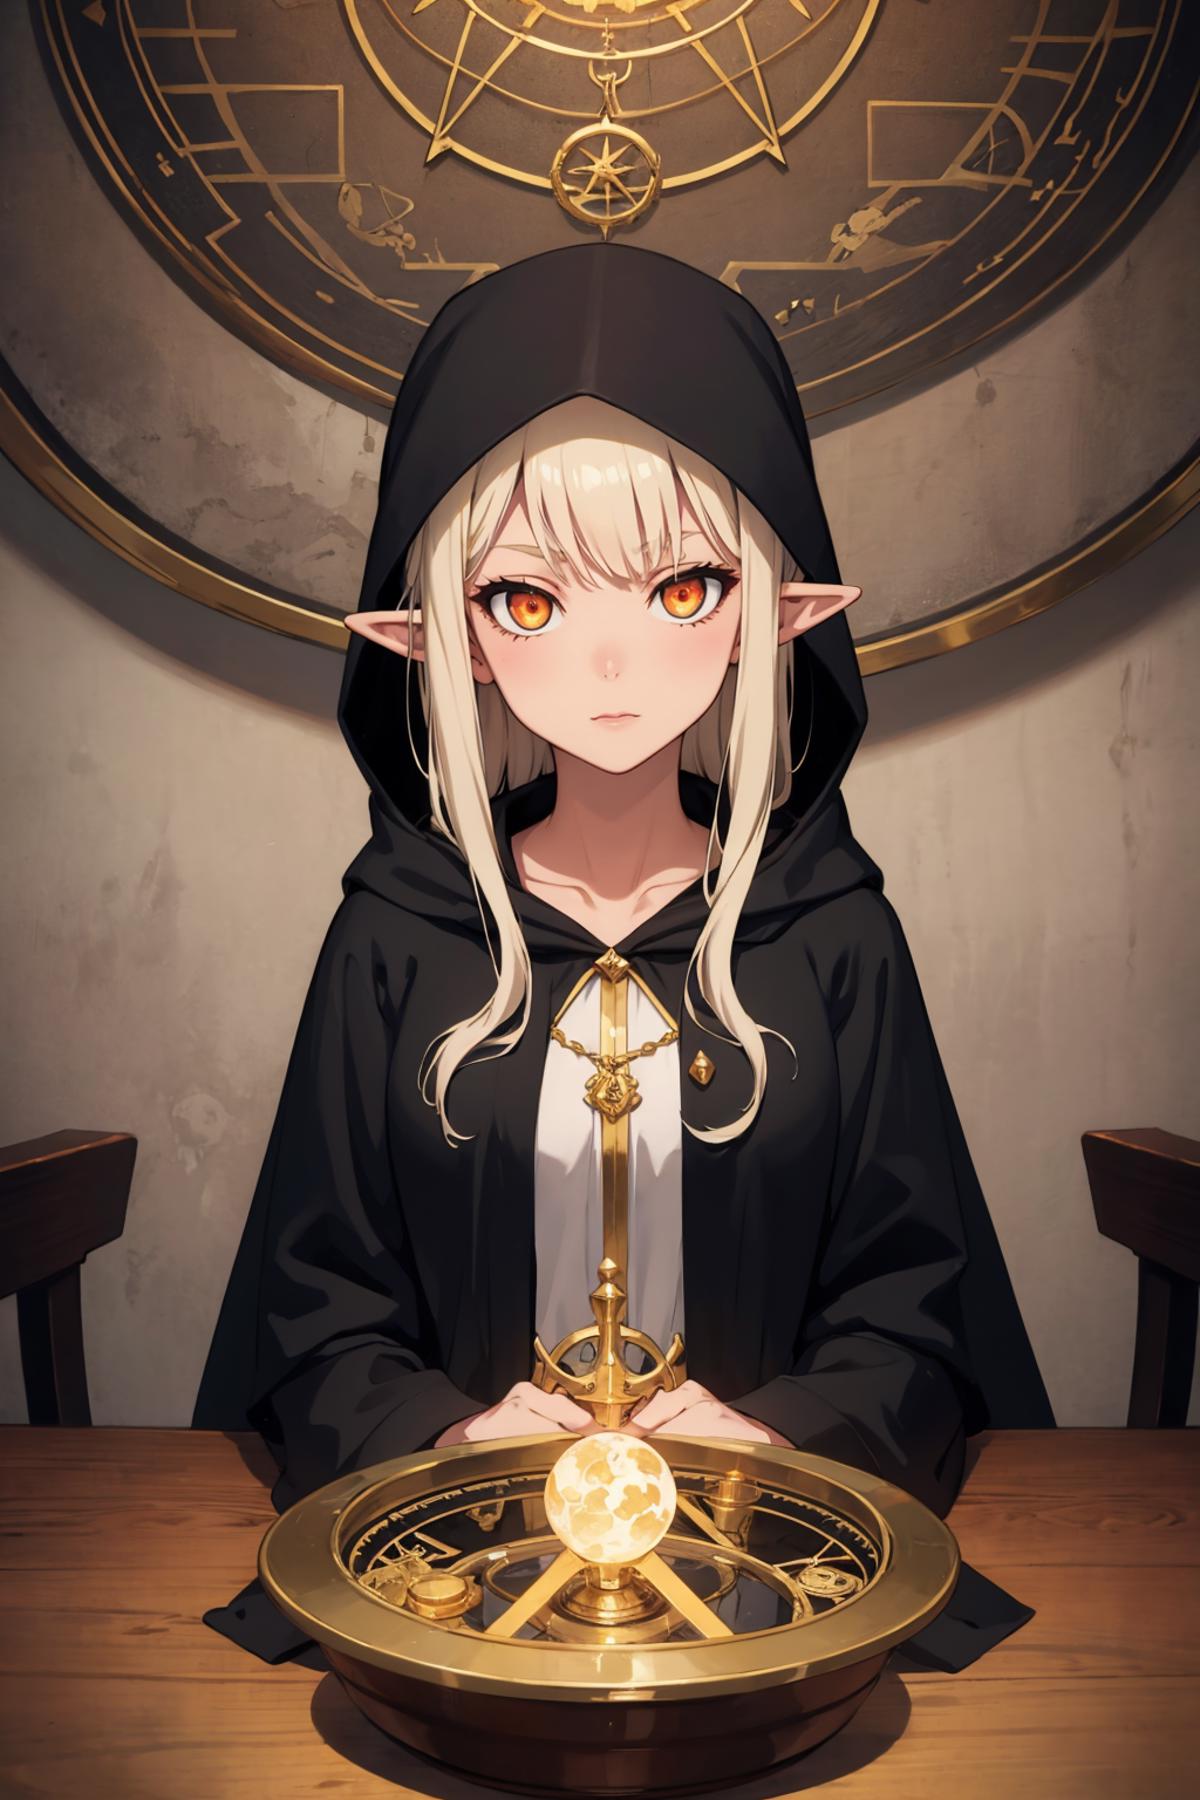 A girl with white hair wearing a black hooded robe.